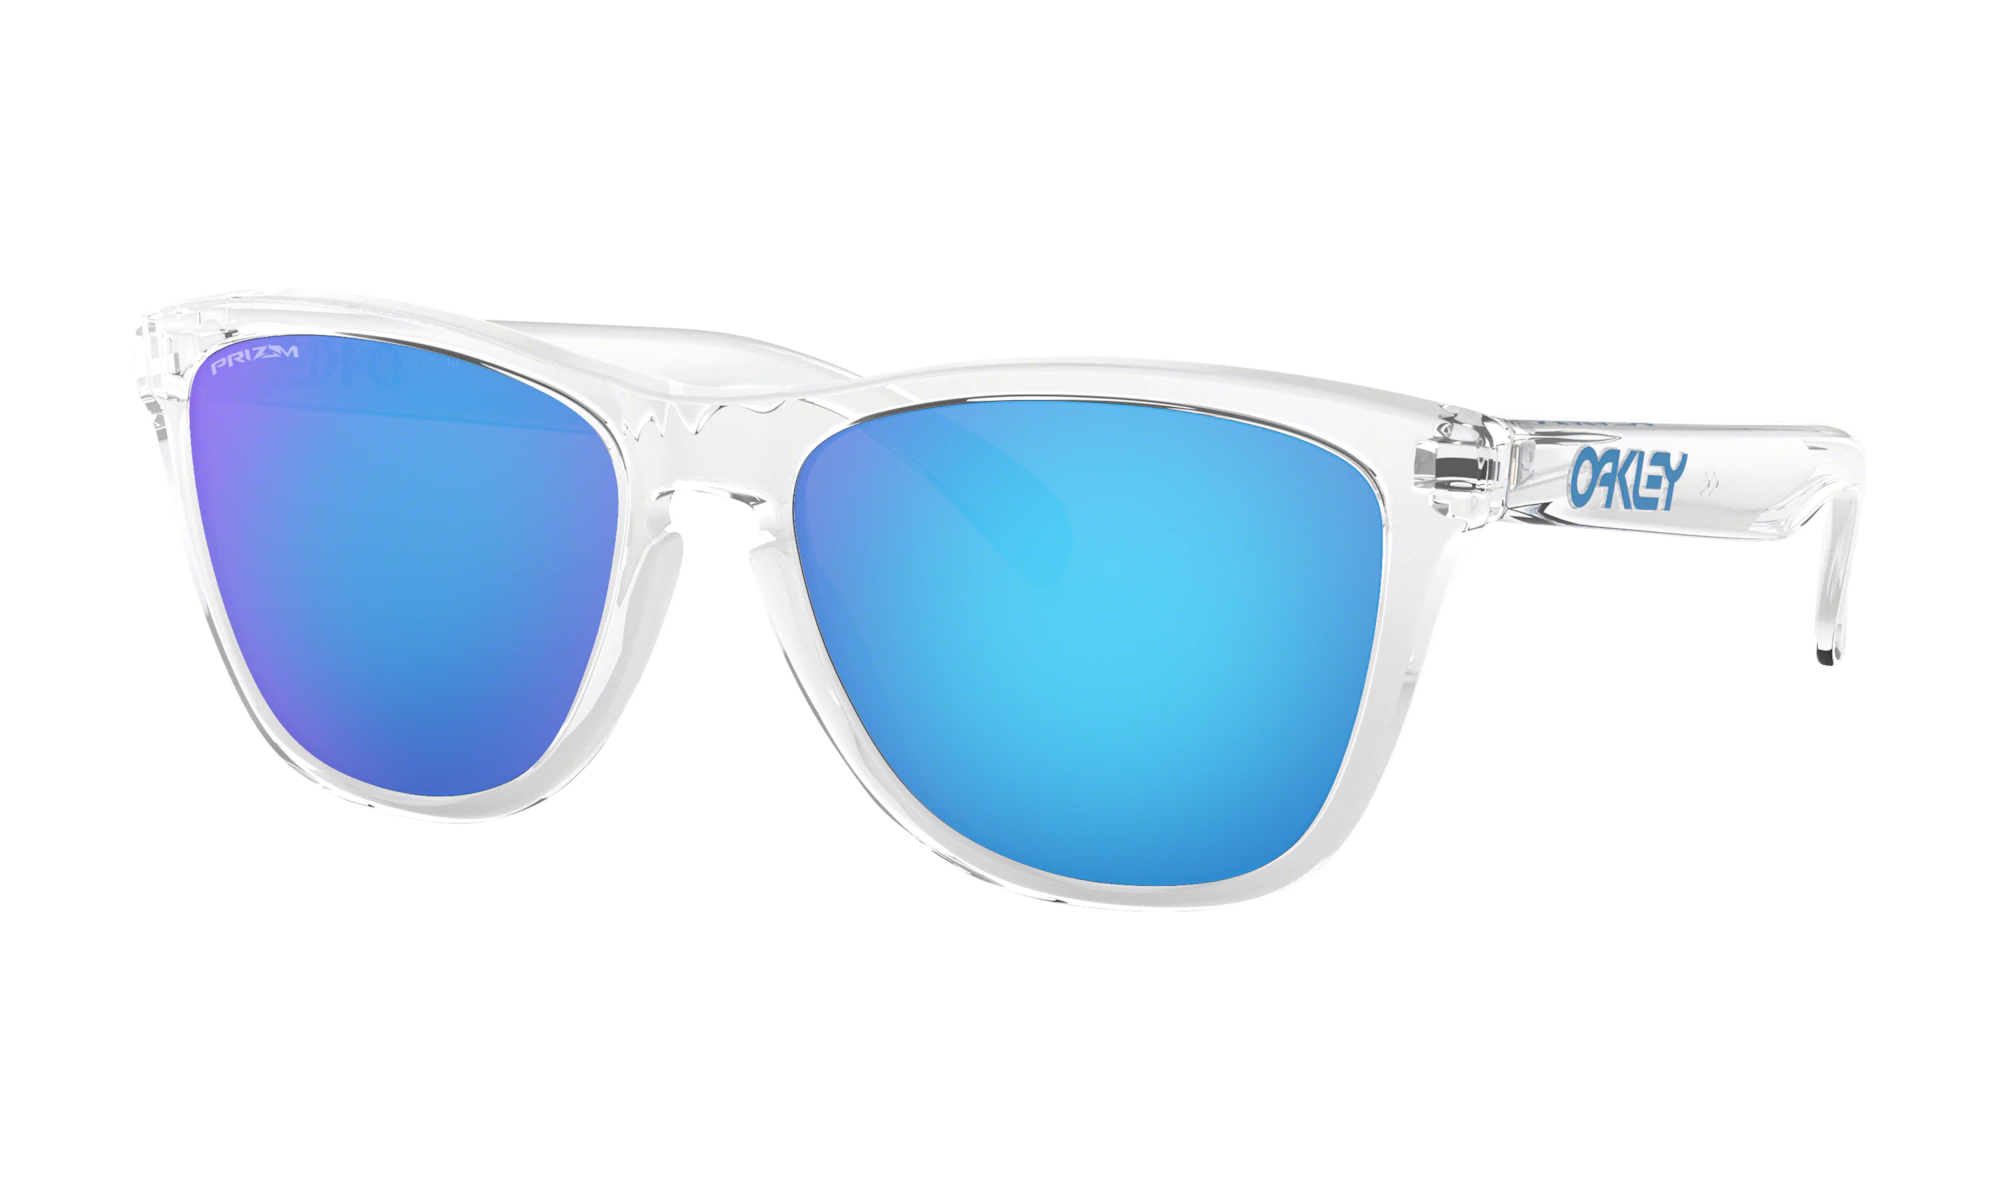 Oakley Frogskins Crystal Clear Prizm Sapphire Sunglasses